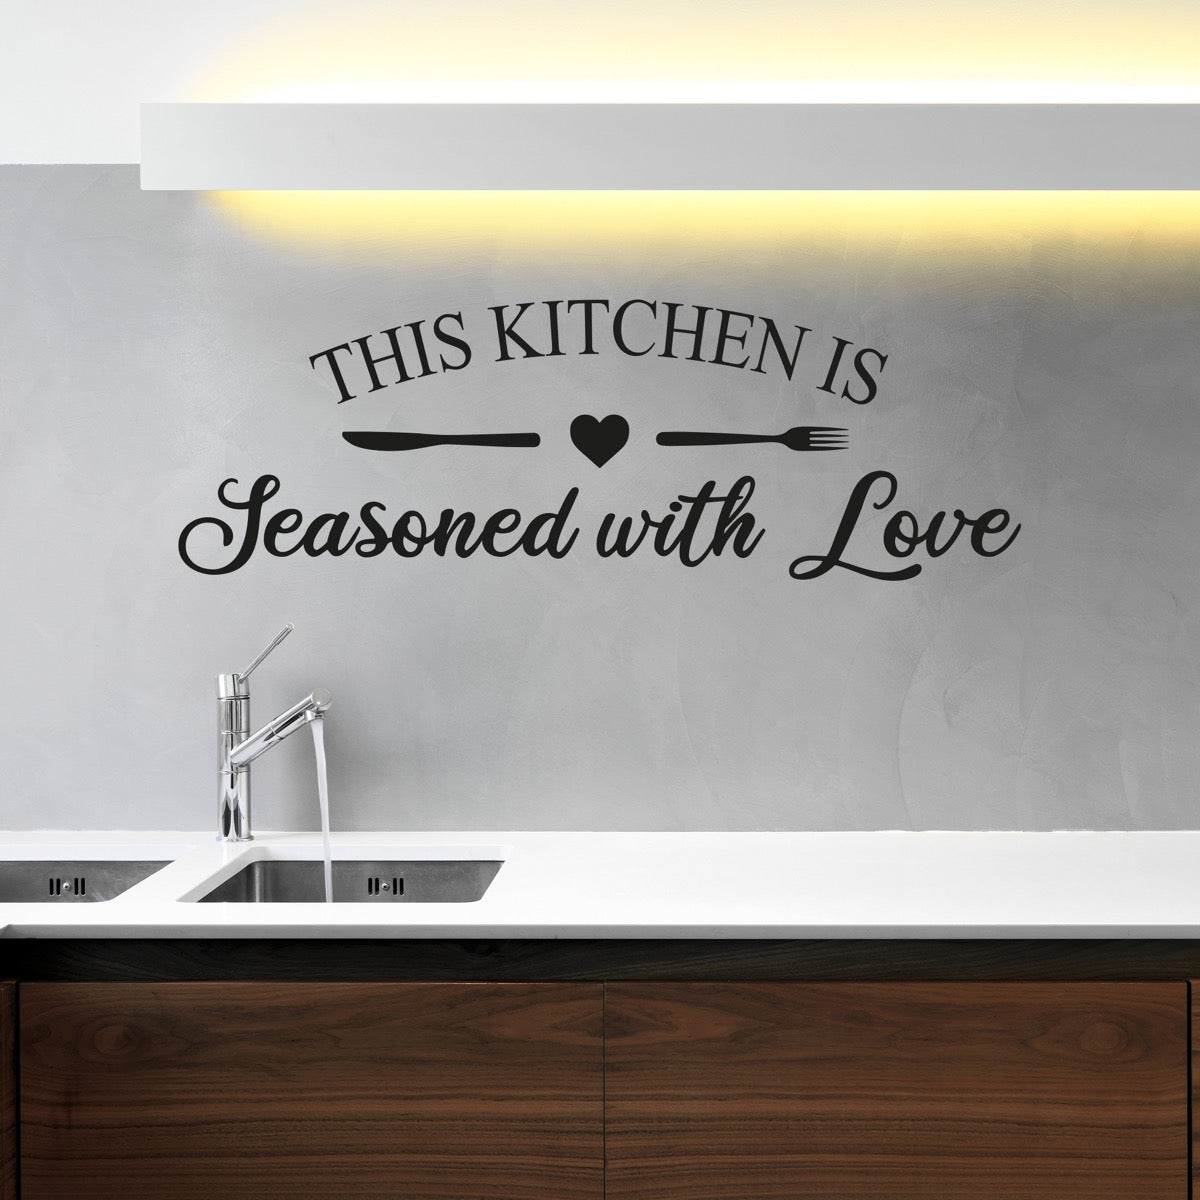 This Kitchen is Seasoned with Love Wall Sticker